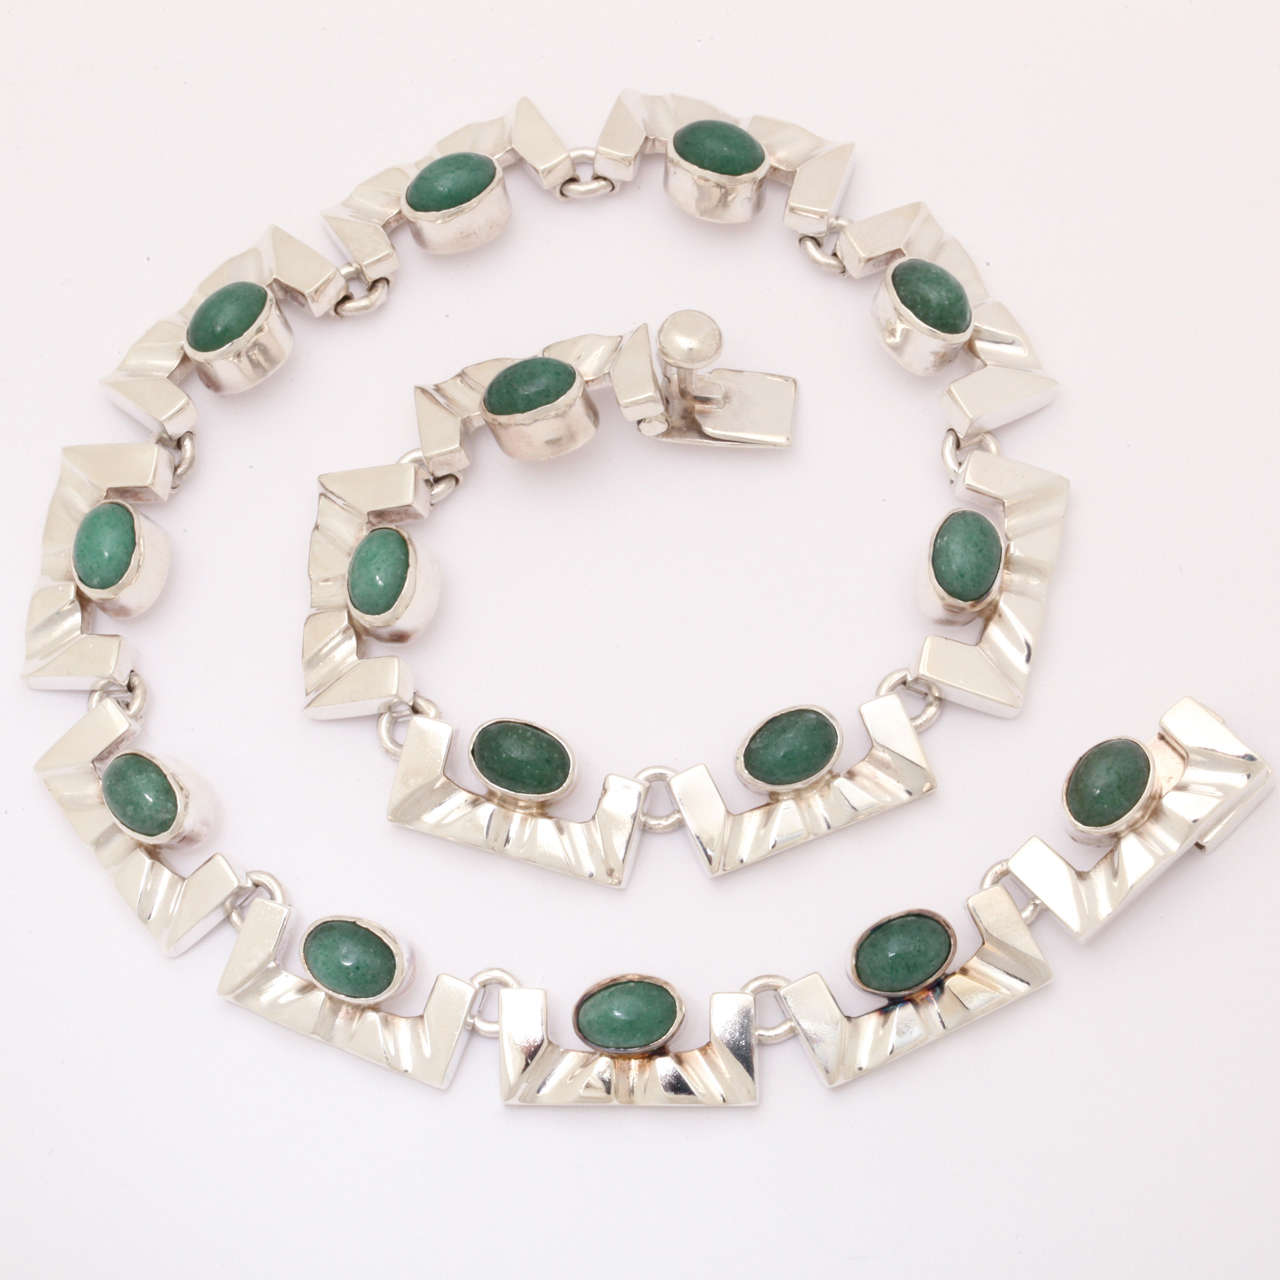 This necklace is an excellent example of vintage handmade Mexican silver from Taxco. It is stamped with 2 pine trees , 925, ts-30. Two trees was an excellent shop in Taxco that produced magnificent, bold pieces. The green stones are aventurine cabs